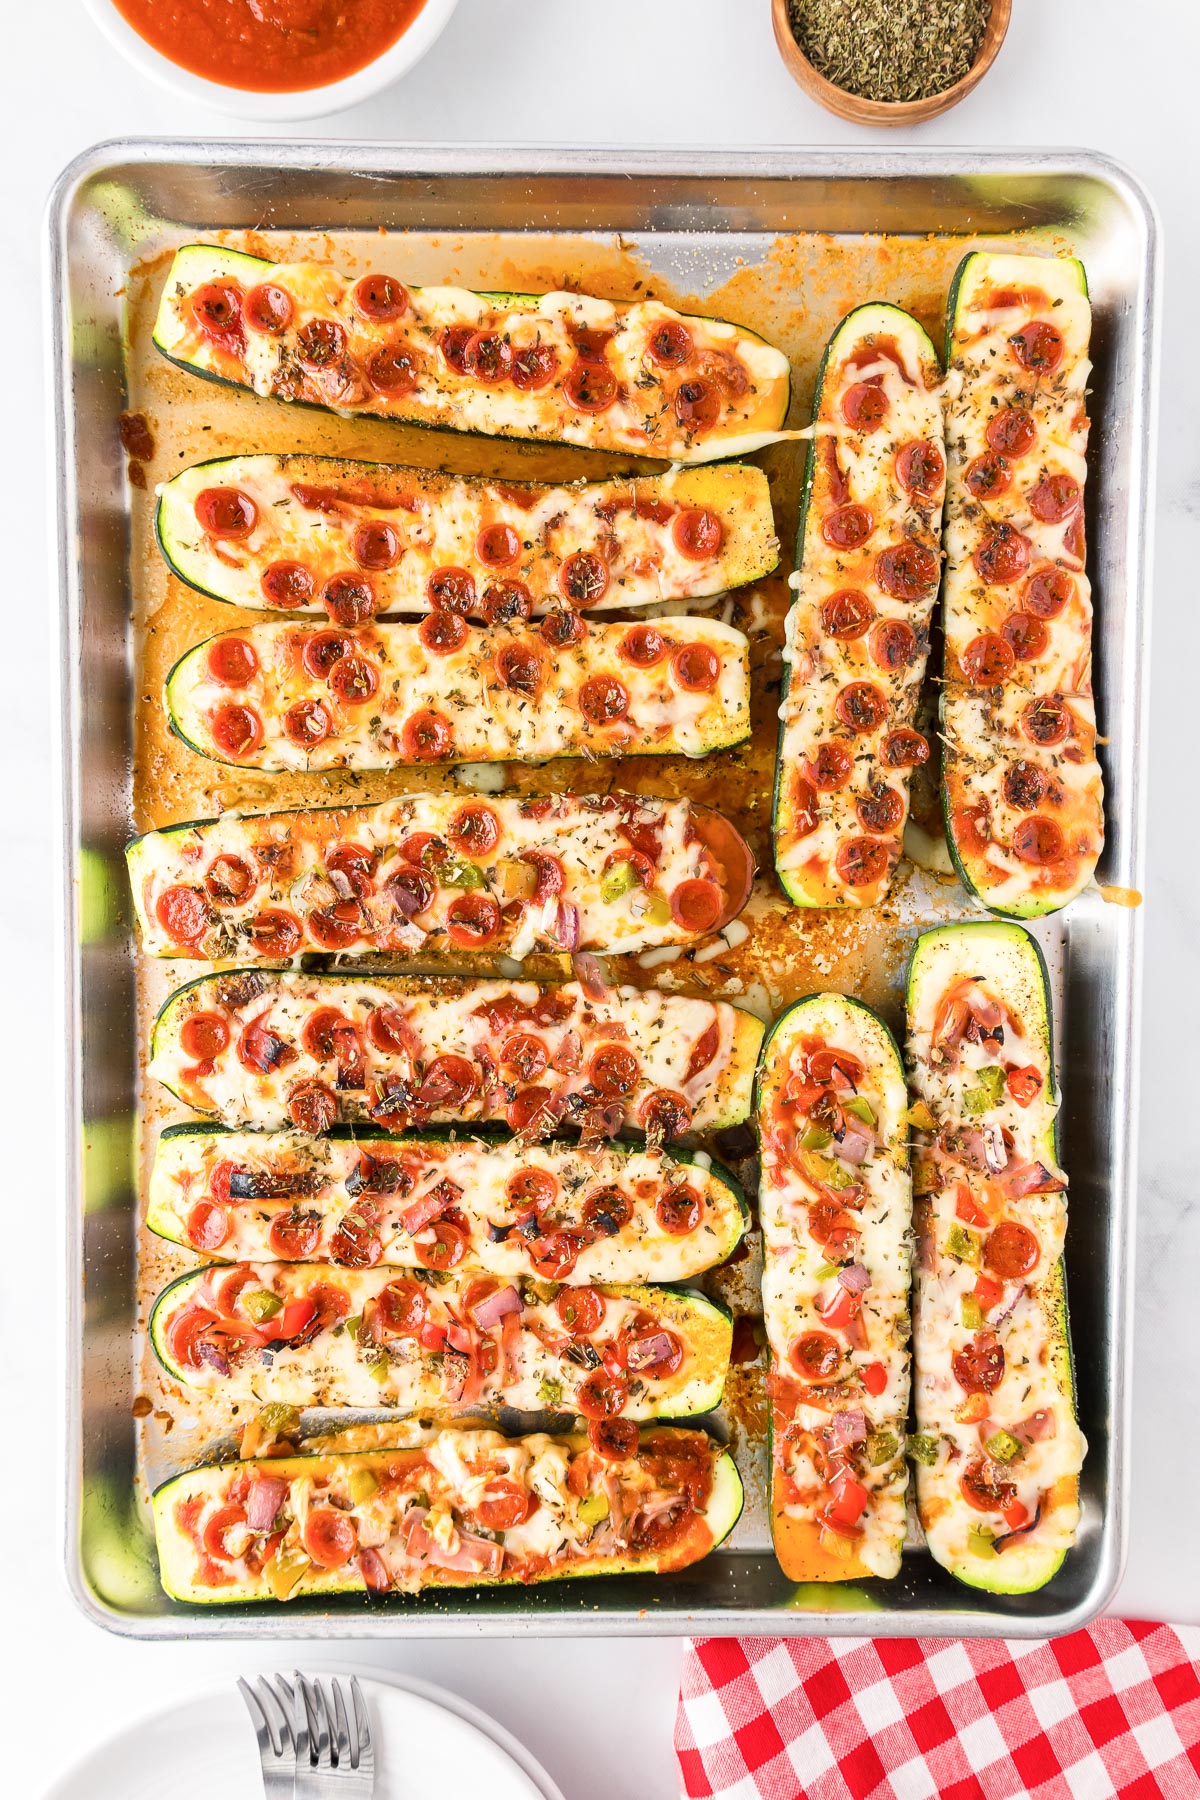 A large baking sheet filled with zucchini pizza boats topped with cheese, pepperoni, diced ham and other vegetable toppings.